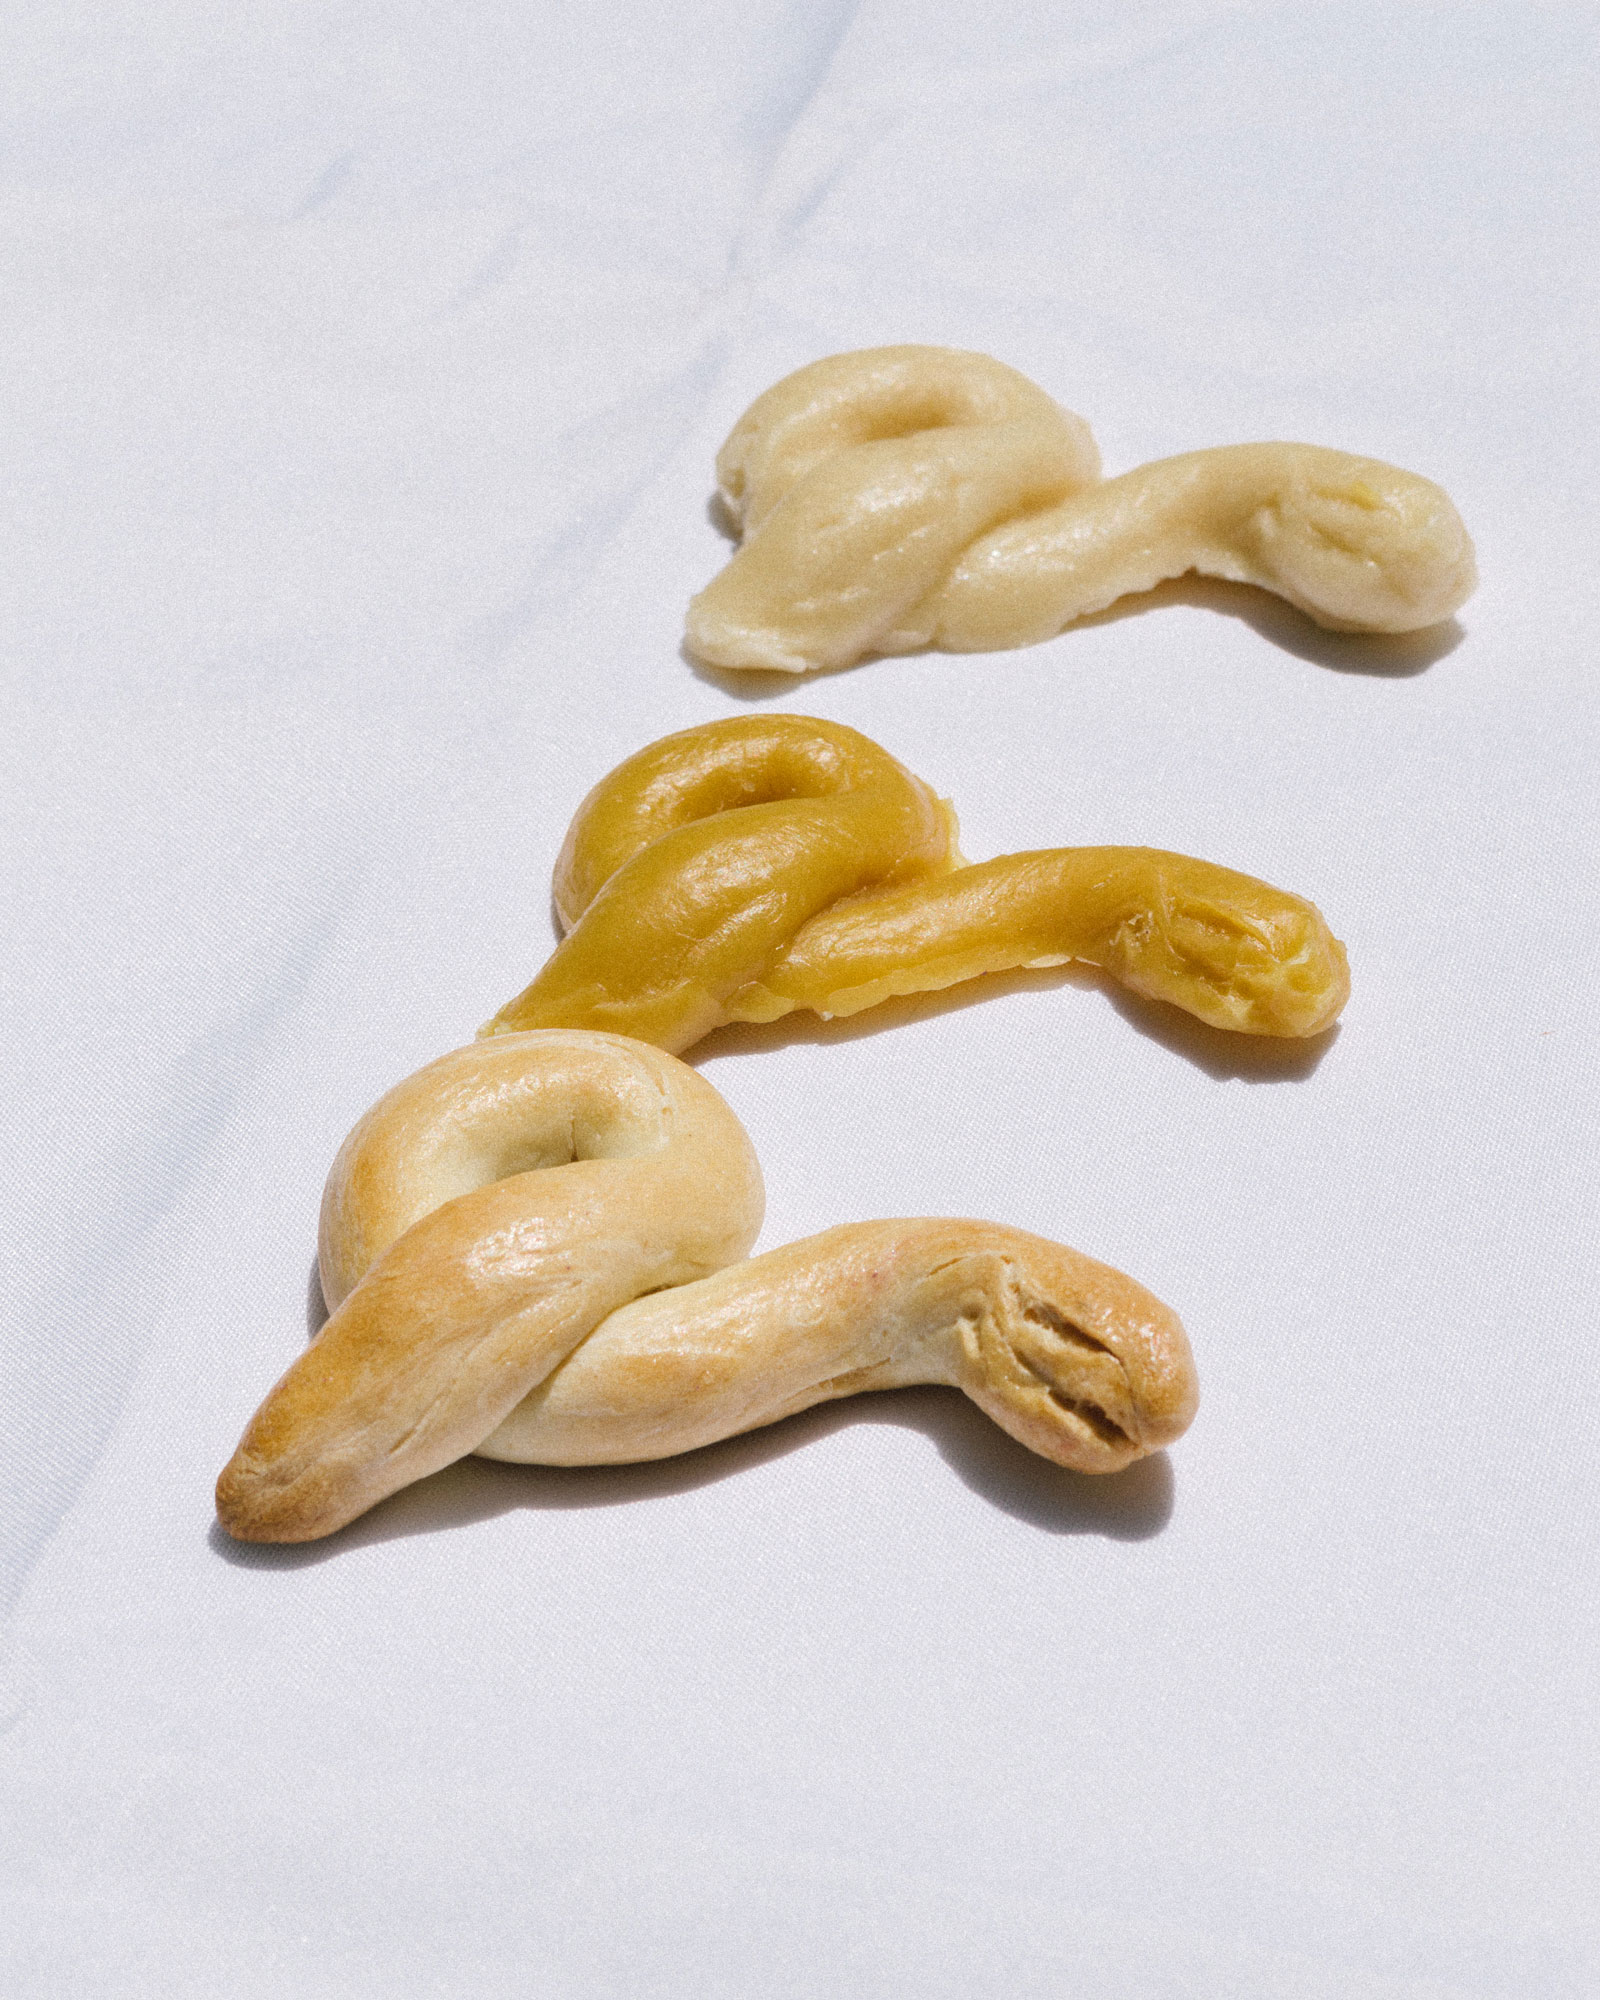 Three bread sculptures are positioned in a vertical line. Each sculpture is identical— a snake head who's body curls over itself once to form a loop in the back. The sculptures are bread-colored, yellow and a pale beige, arranged in order of baked-ness.